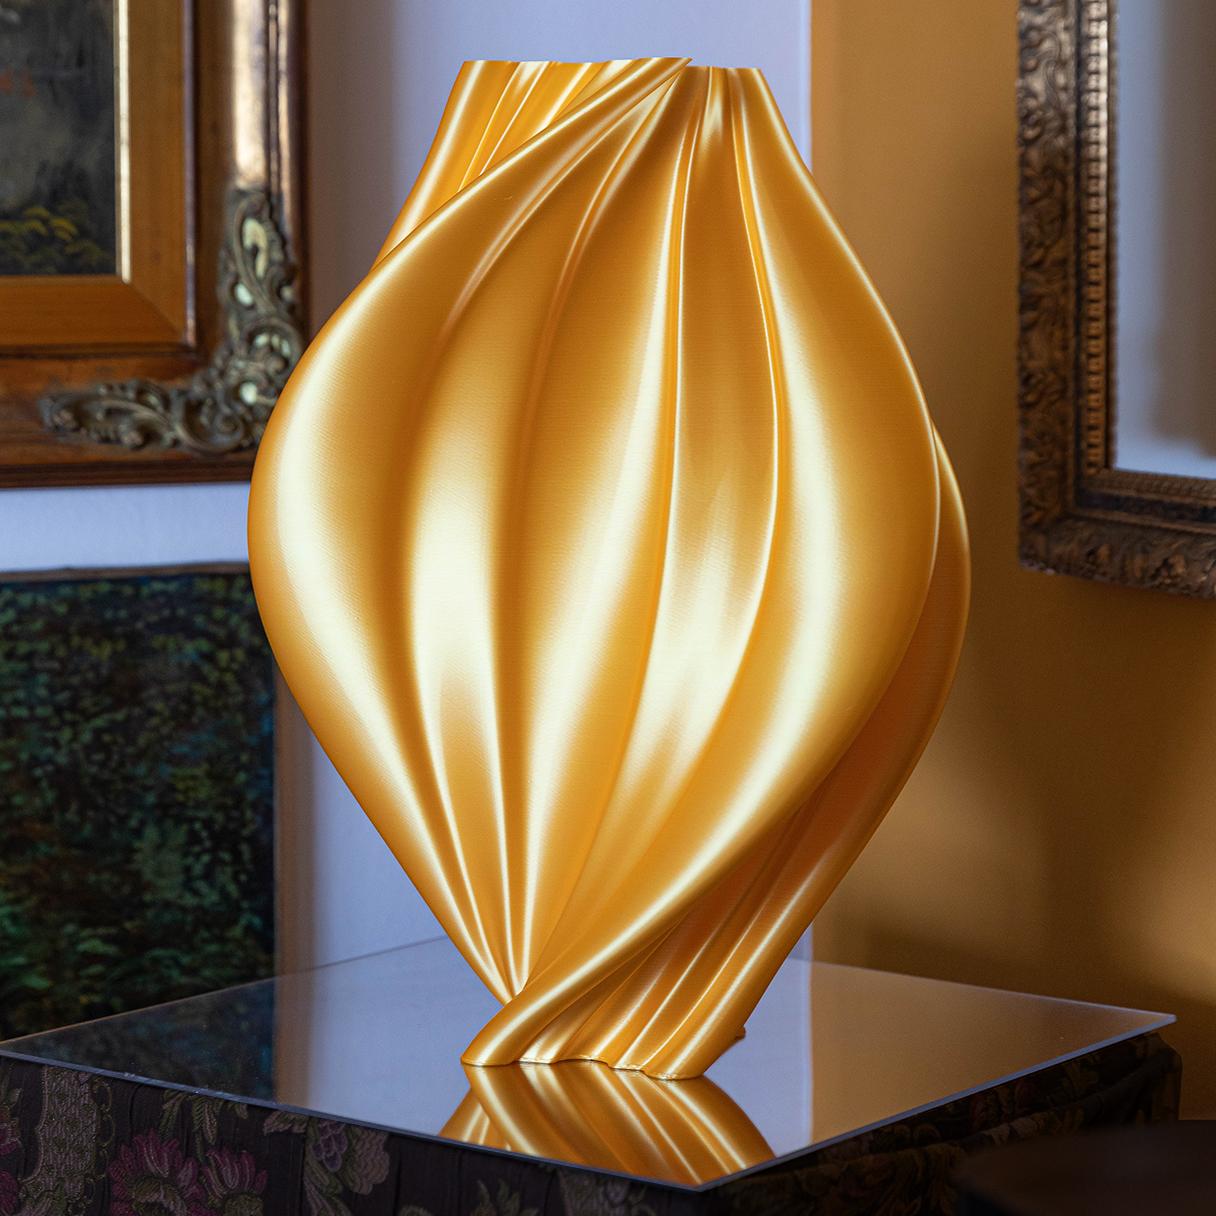 Damocle, Gold Contemporary Sustainable Vase-Sculpture 1